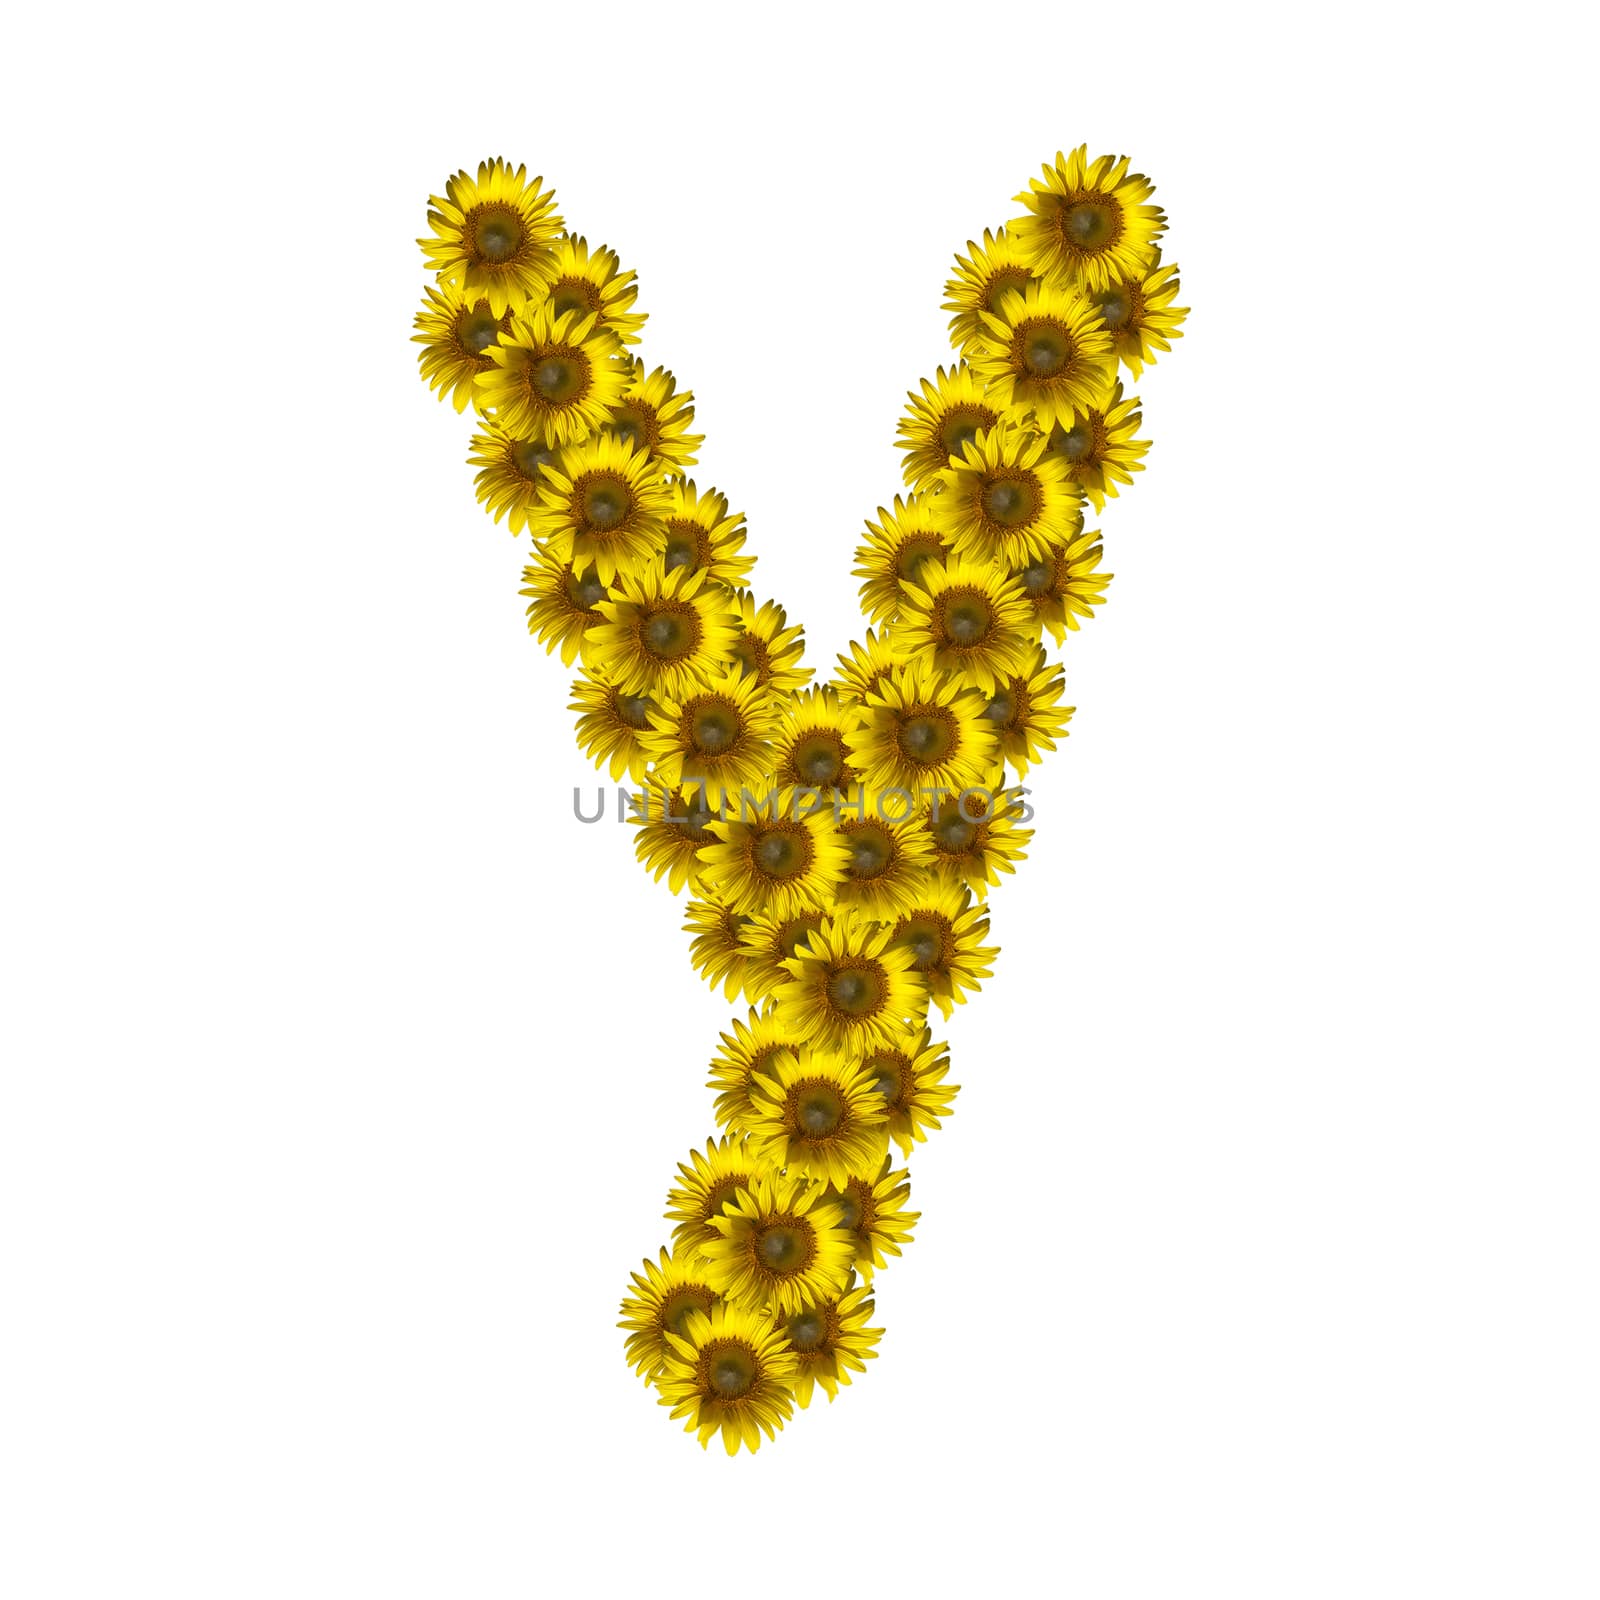 Isolated sunflower alphabet Y by Exsodus